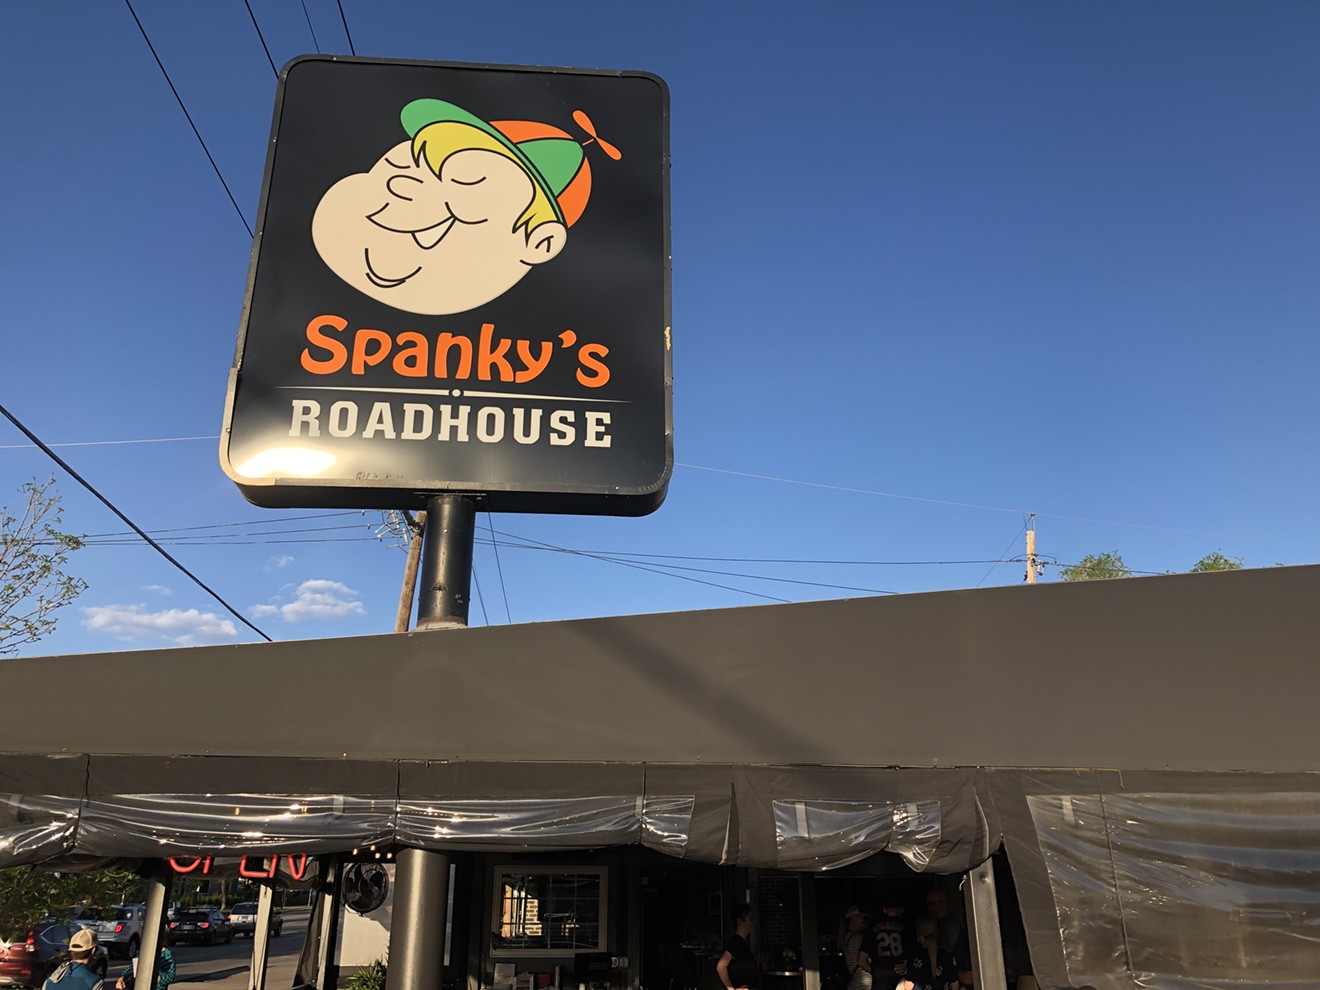 Spanky's Roadhouse offers a little something for the whole neighborhood surrounding the University of Denver.